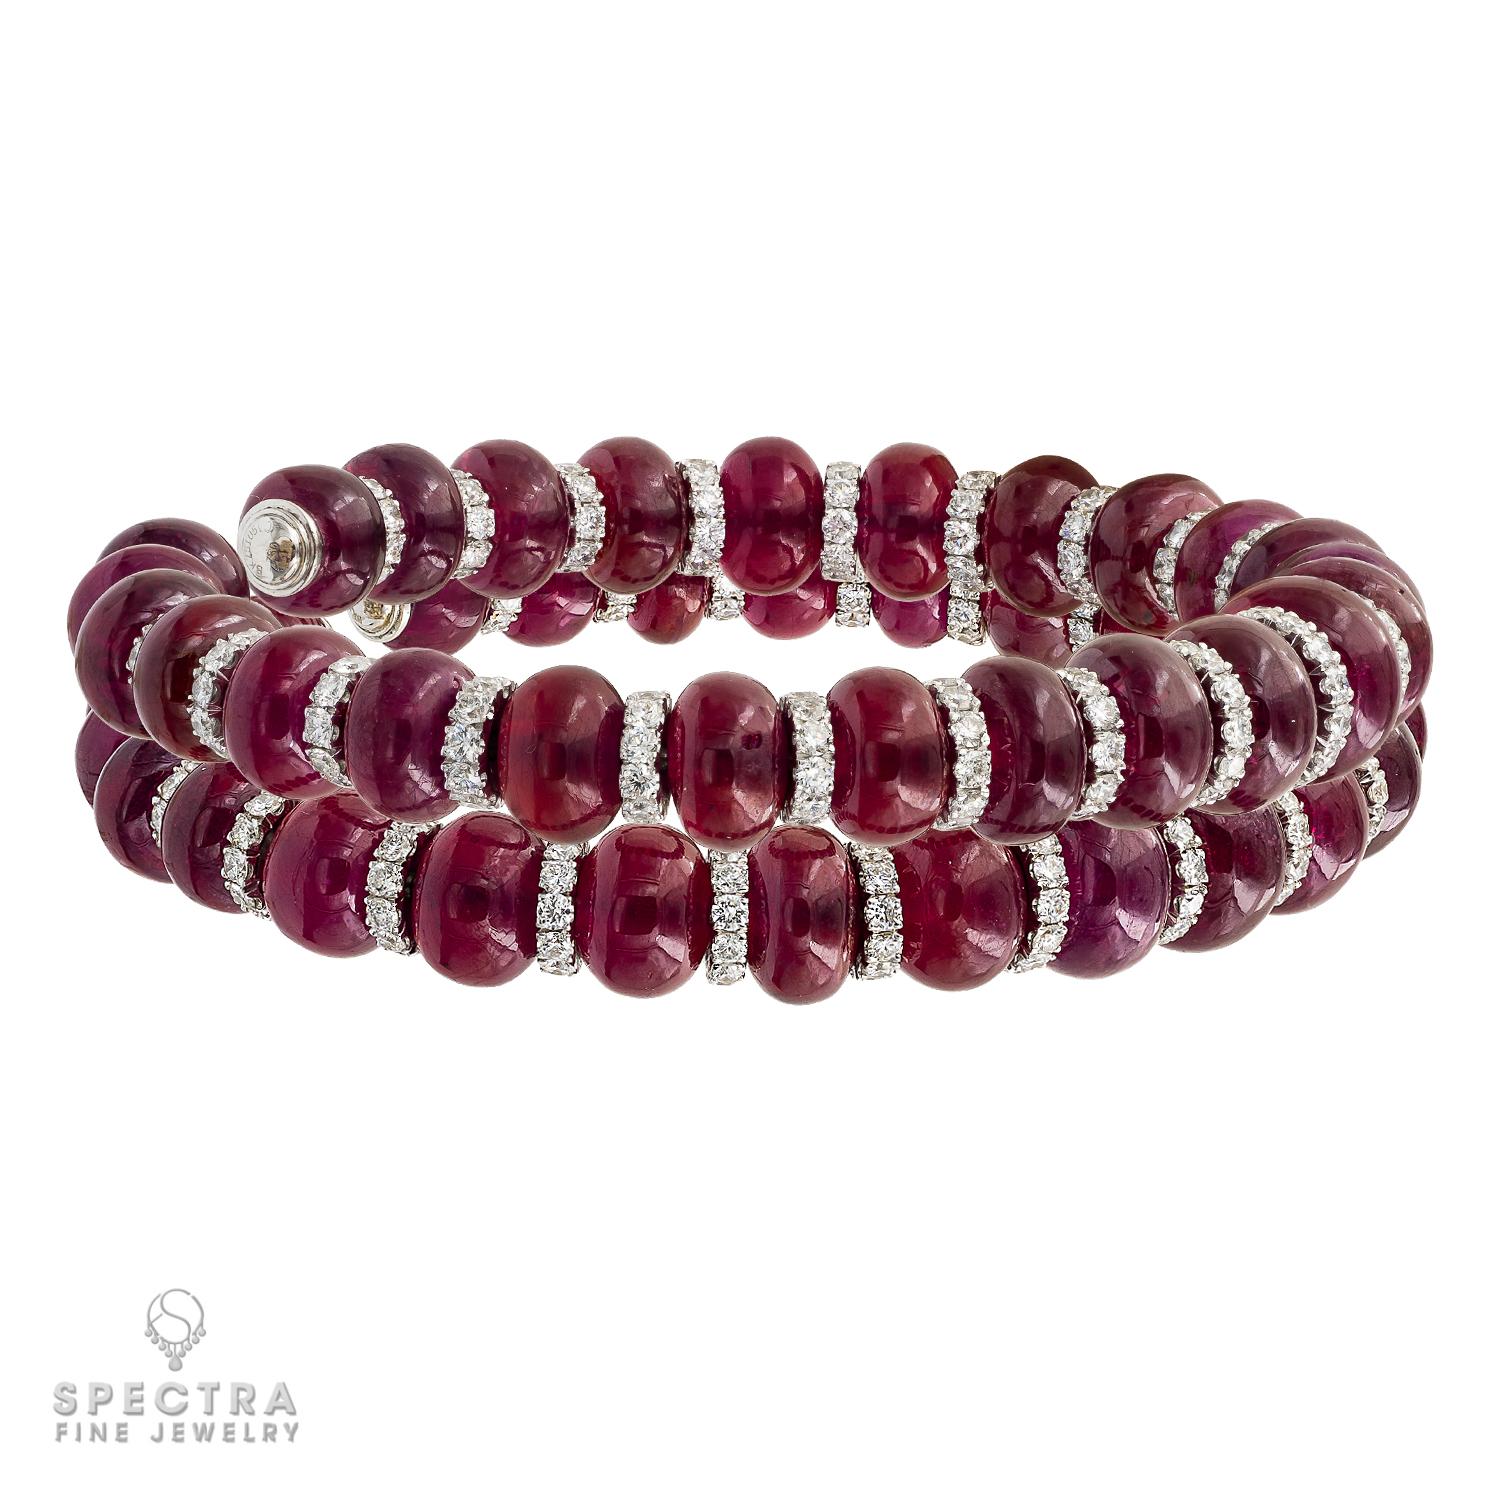 The unique beauty of rubies, prized for their vibrant color and rarity, captivates in any form, be they faceted or lustrous, cut or carved. Rubies have been treasured and revered for centuries, their intense red color a symbol of passion, love,